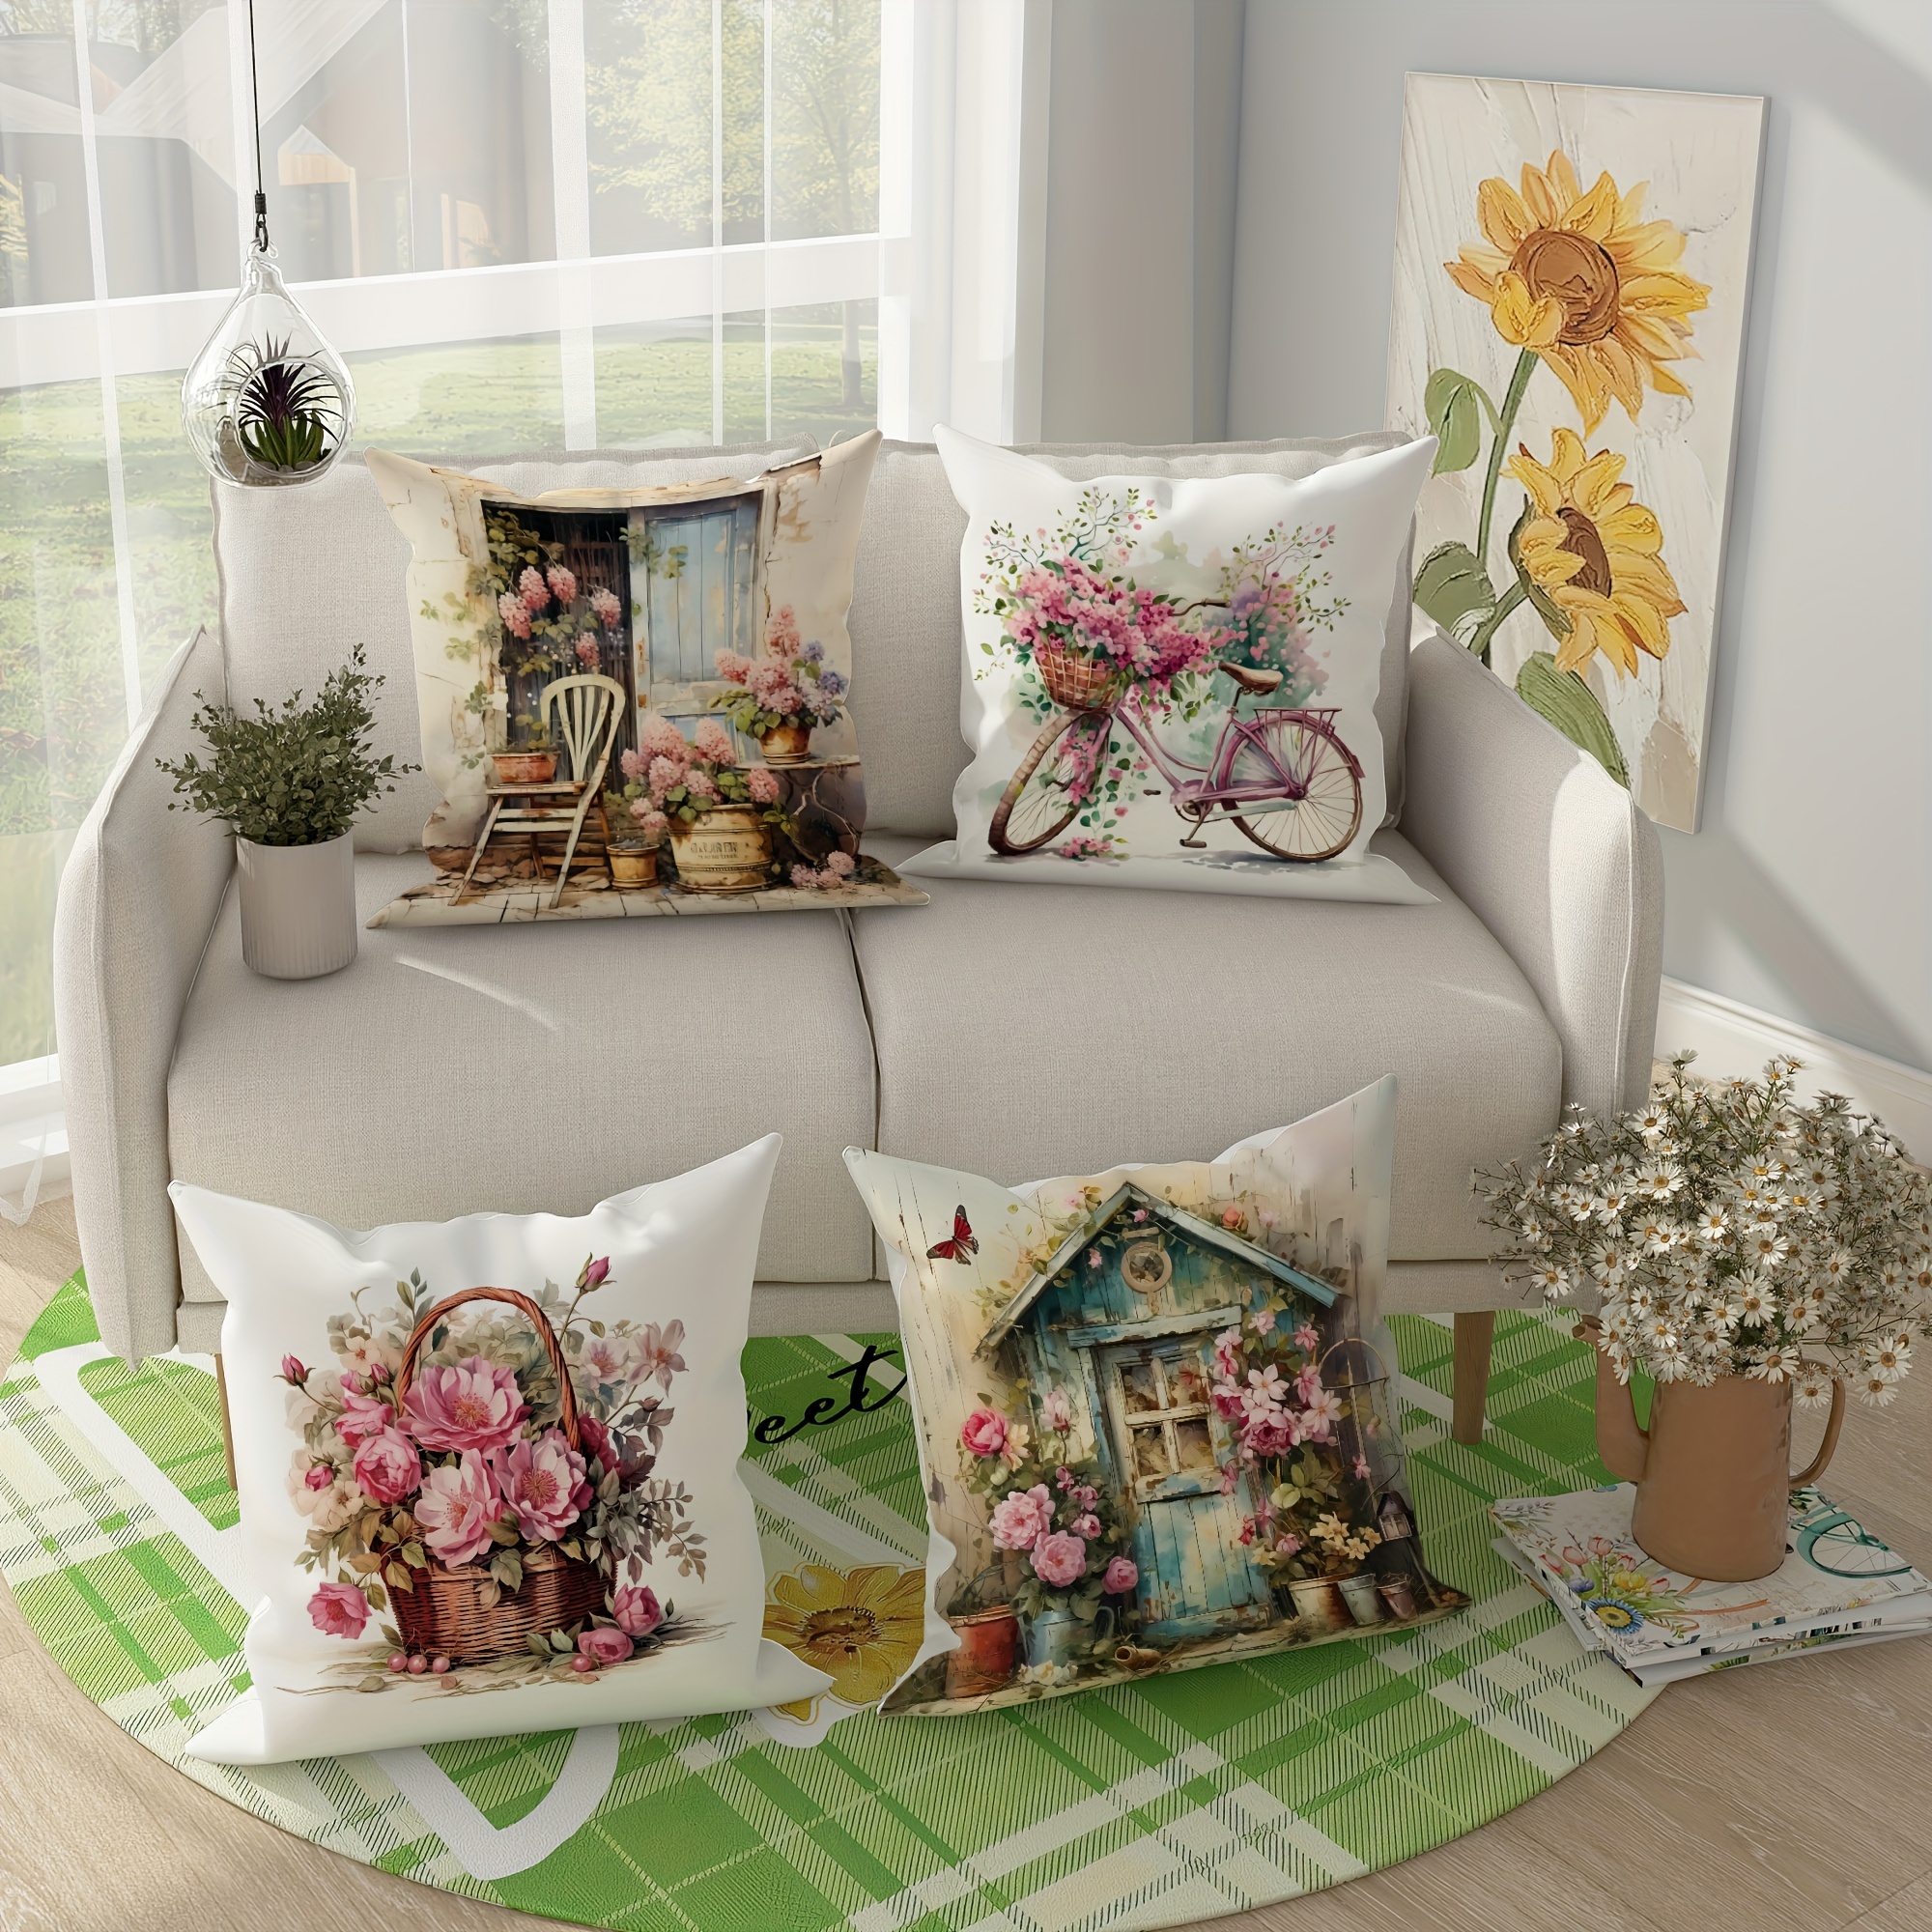 

Spring Cottage Velvet Throw Pillow Covers, 4pc Set - Farmhouse Bicycle & Flower Basket Design For Living Room And Bedroom Decor